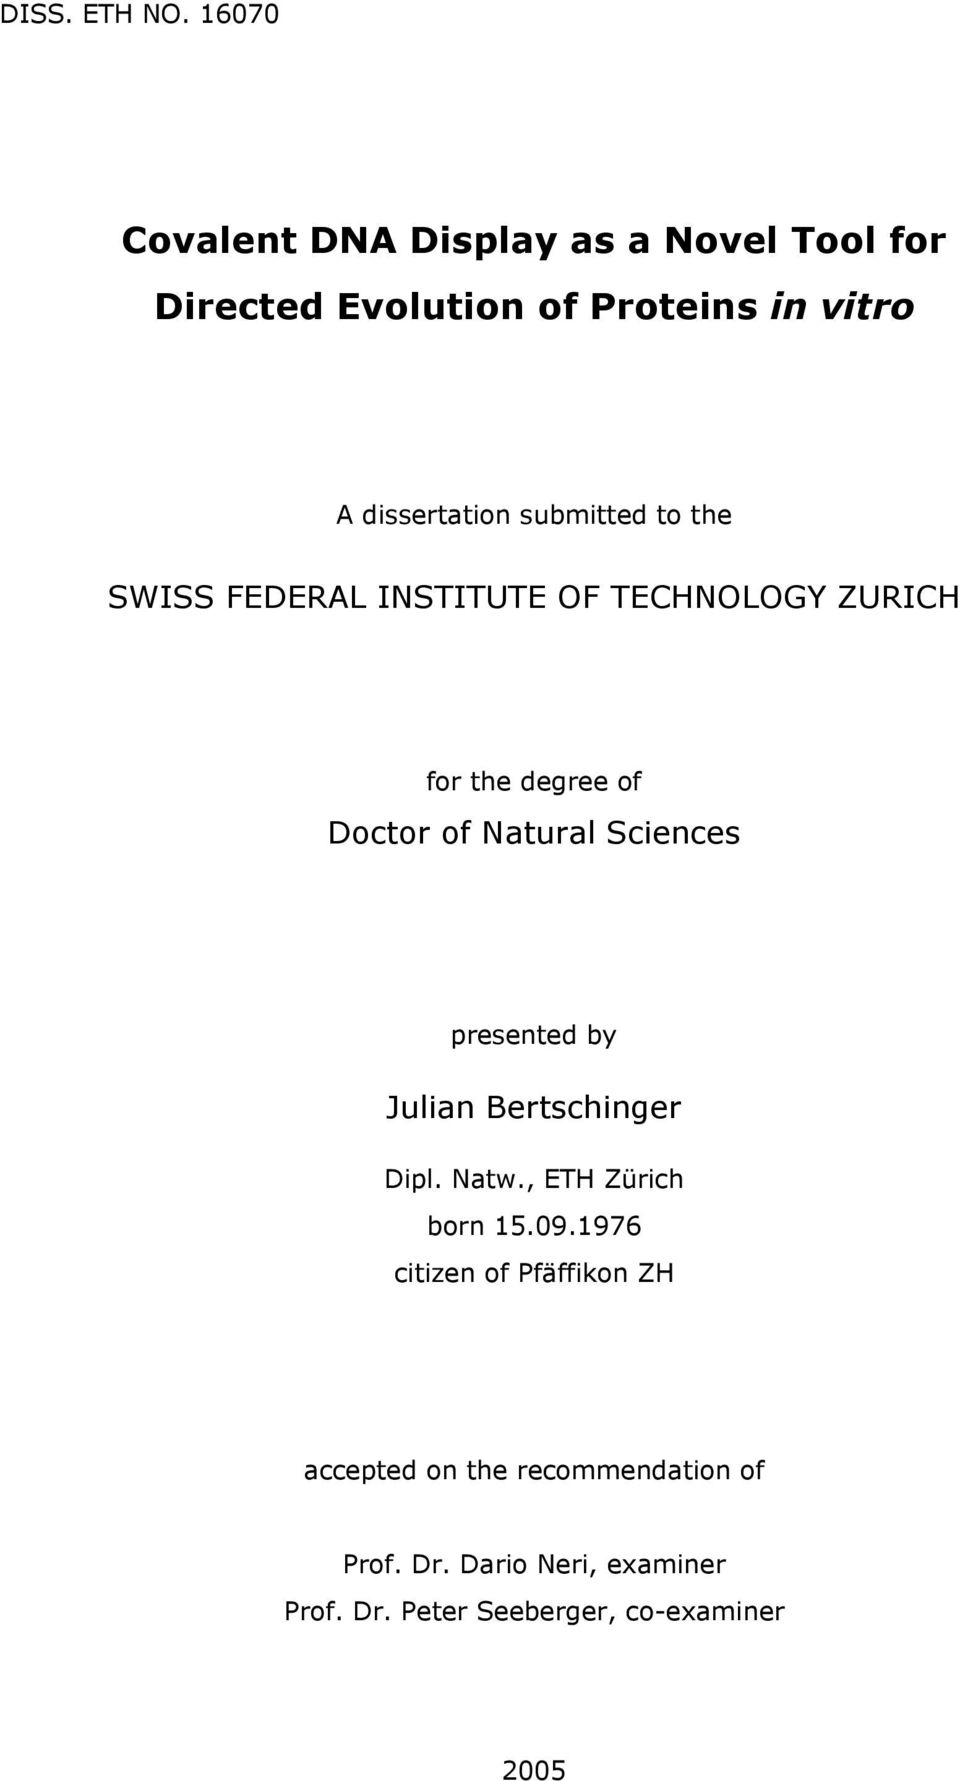 submitted to the SWISS FEDERAL INSTITUTE OF TECHNOLOGY ZURICH for the degree of Doctor of Natural Sciences